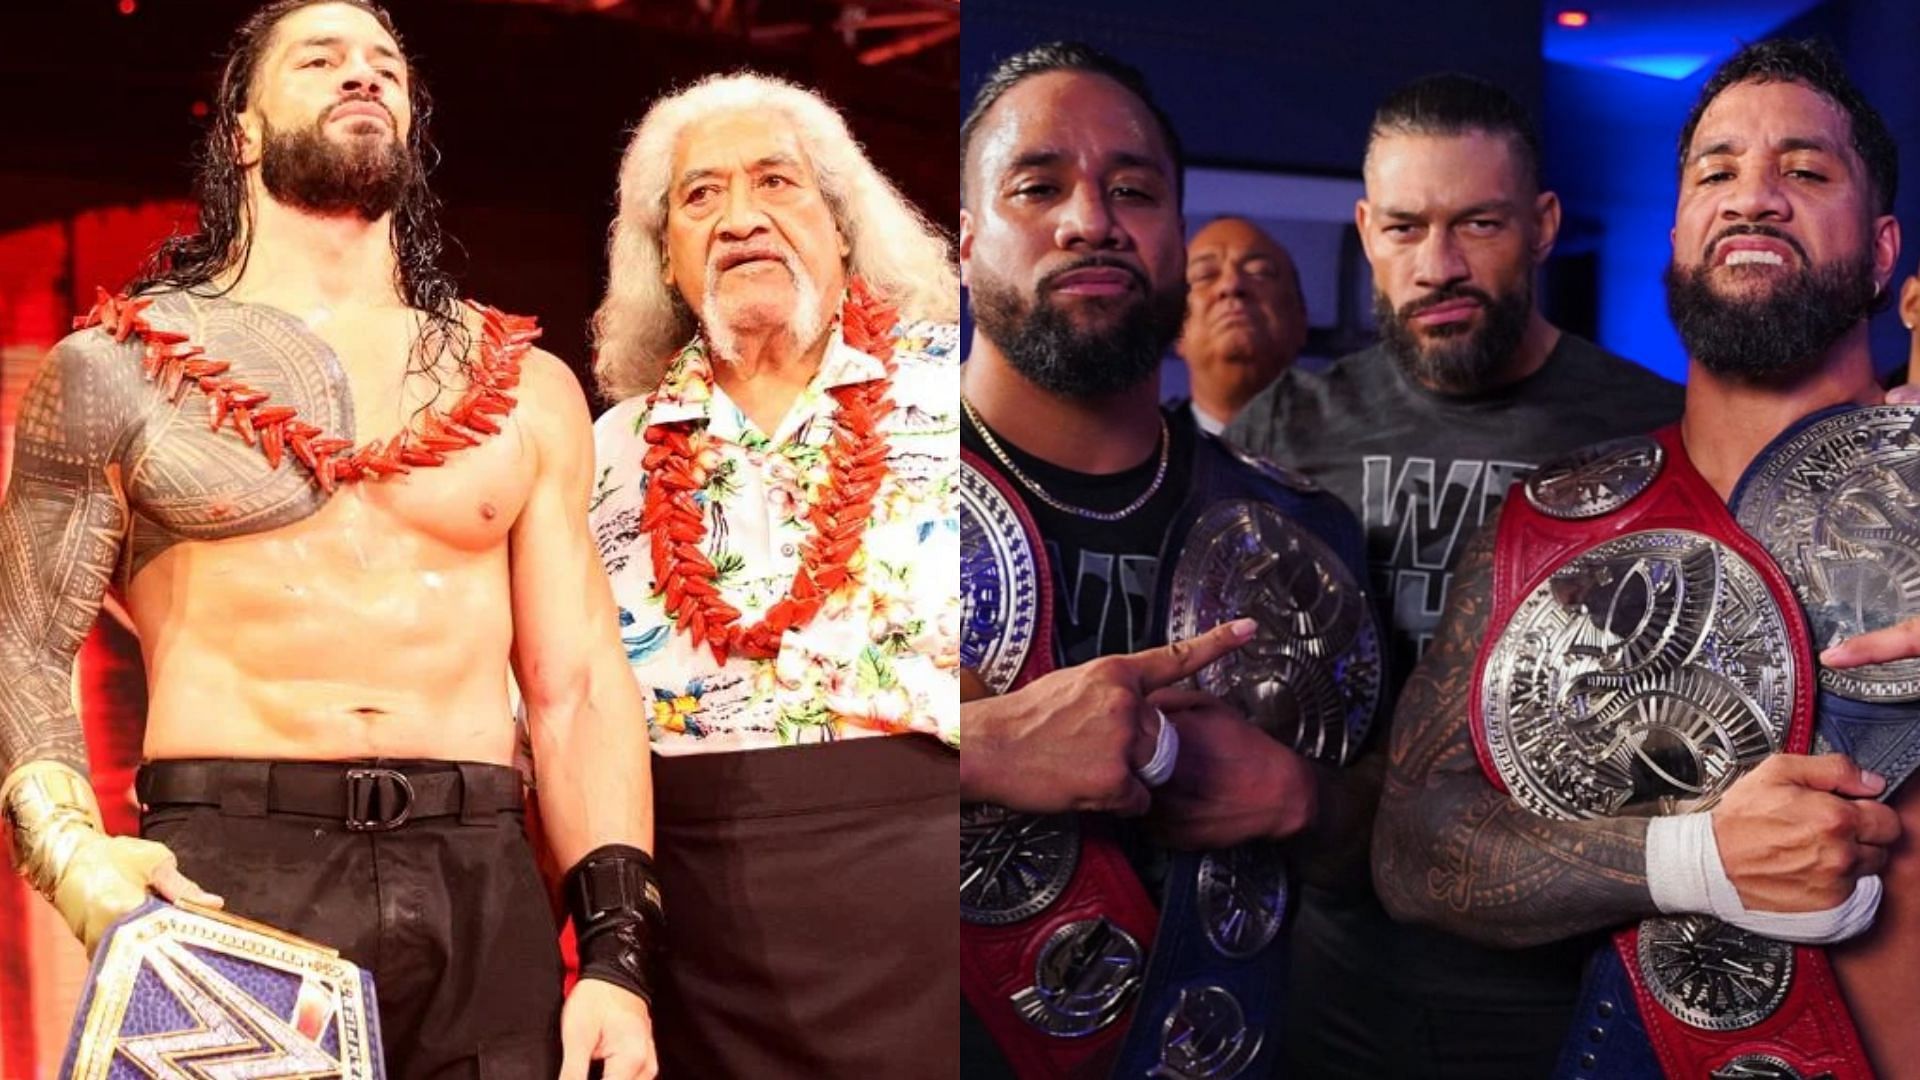 The Bloodline have taken over the WWE.